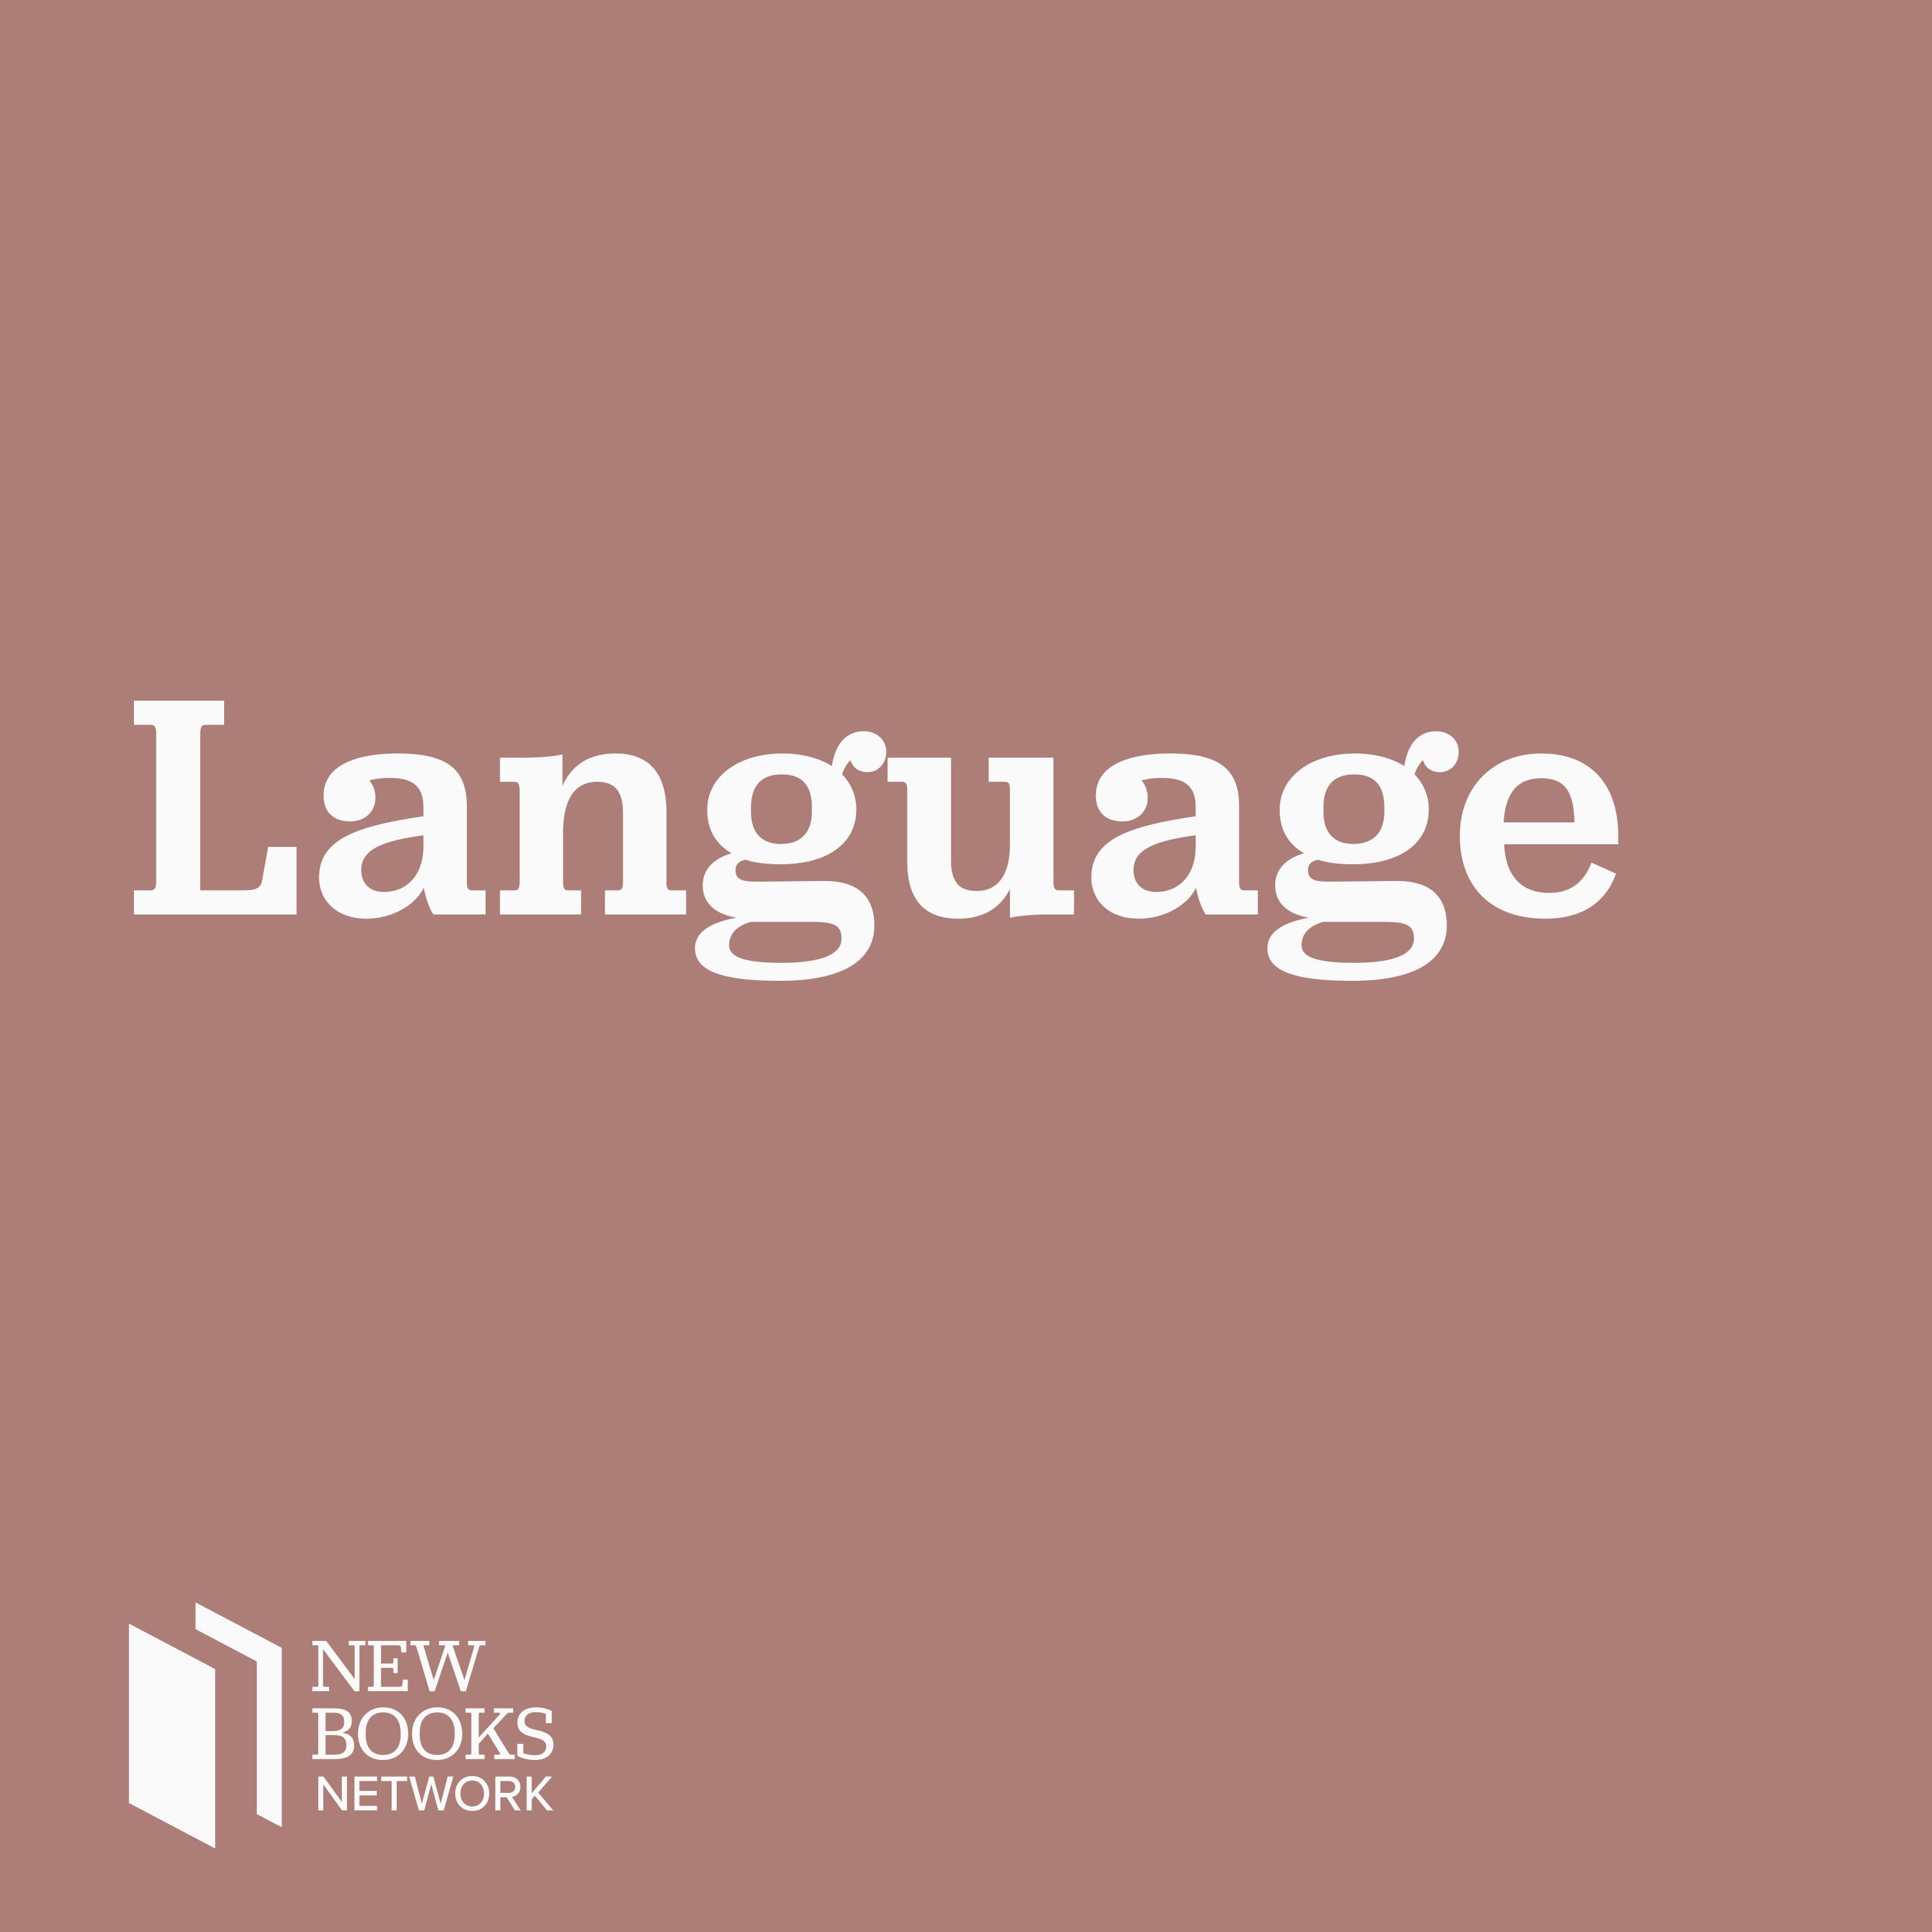 New Books in Language podcast show image